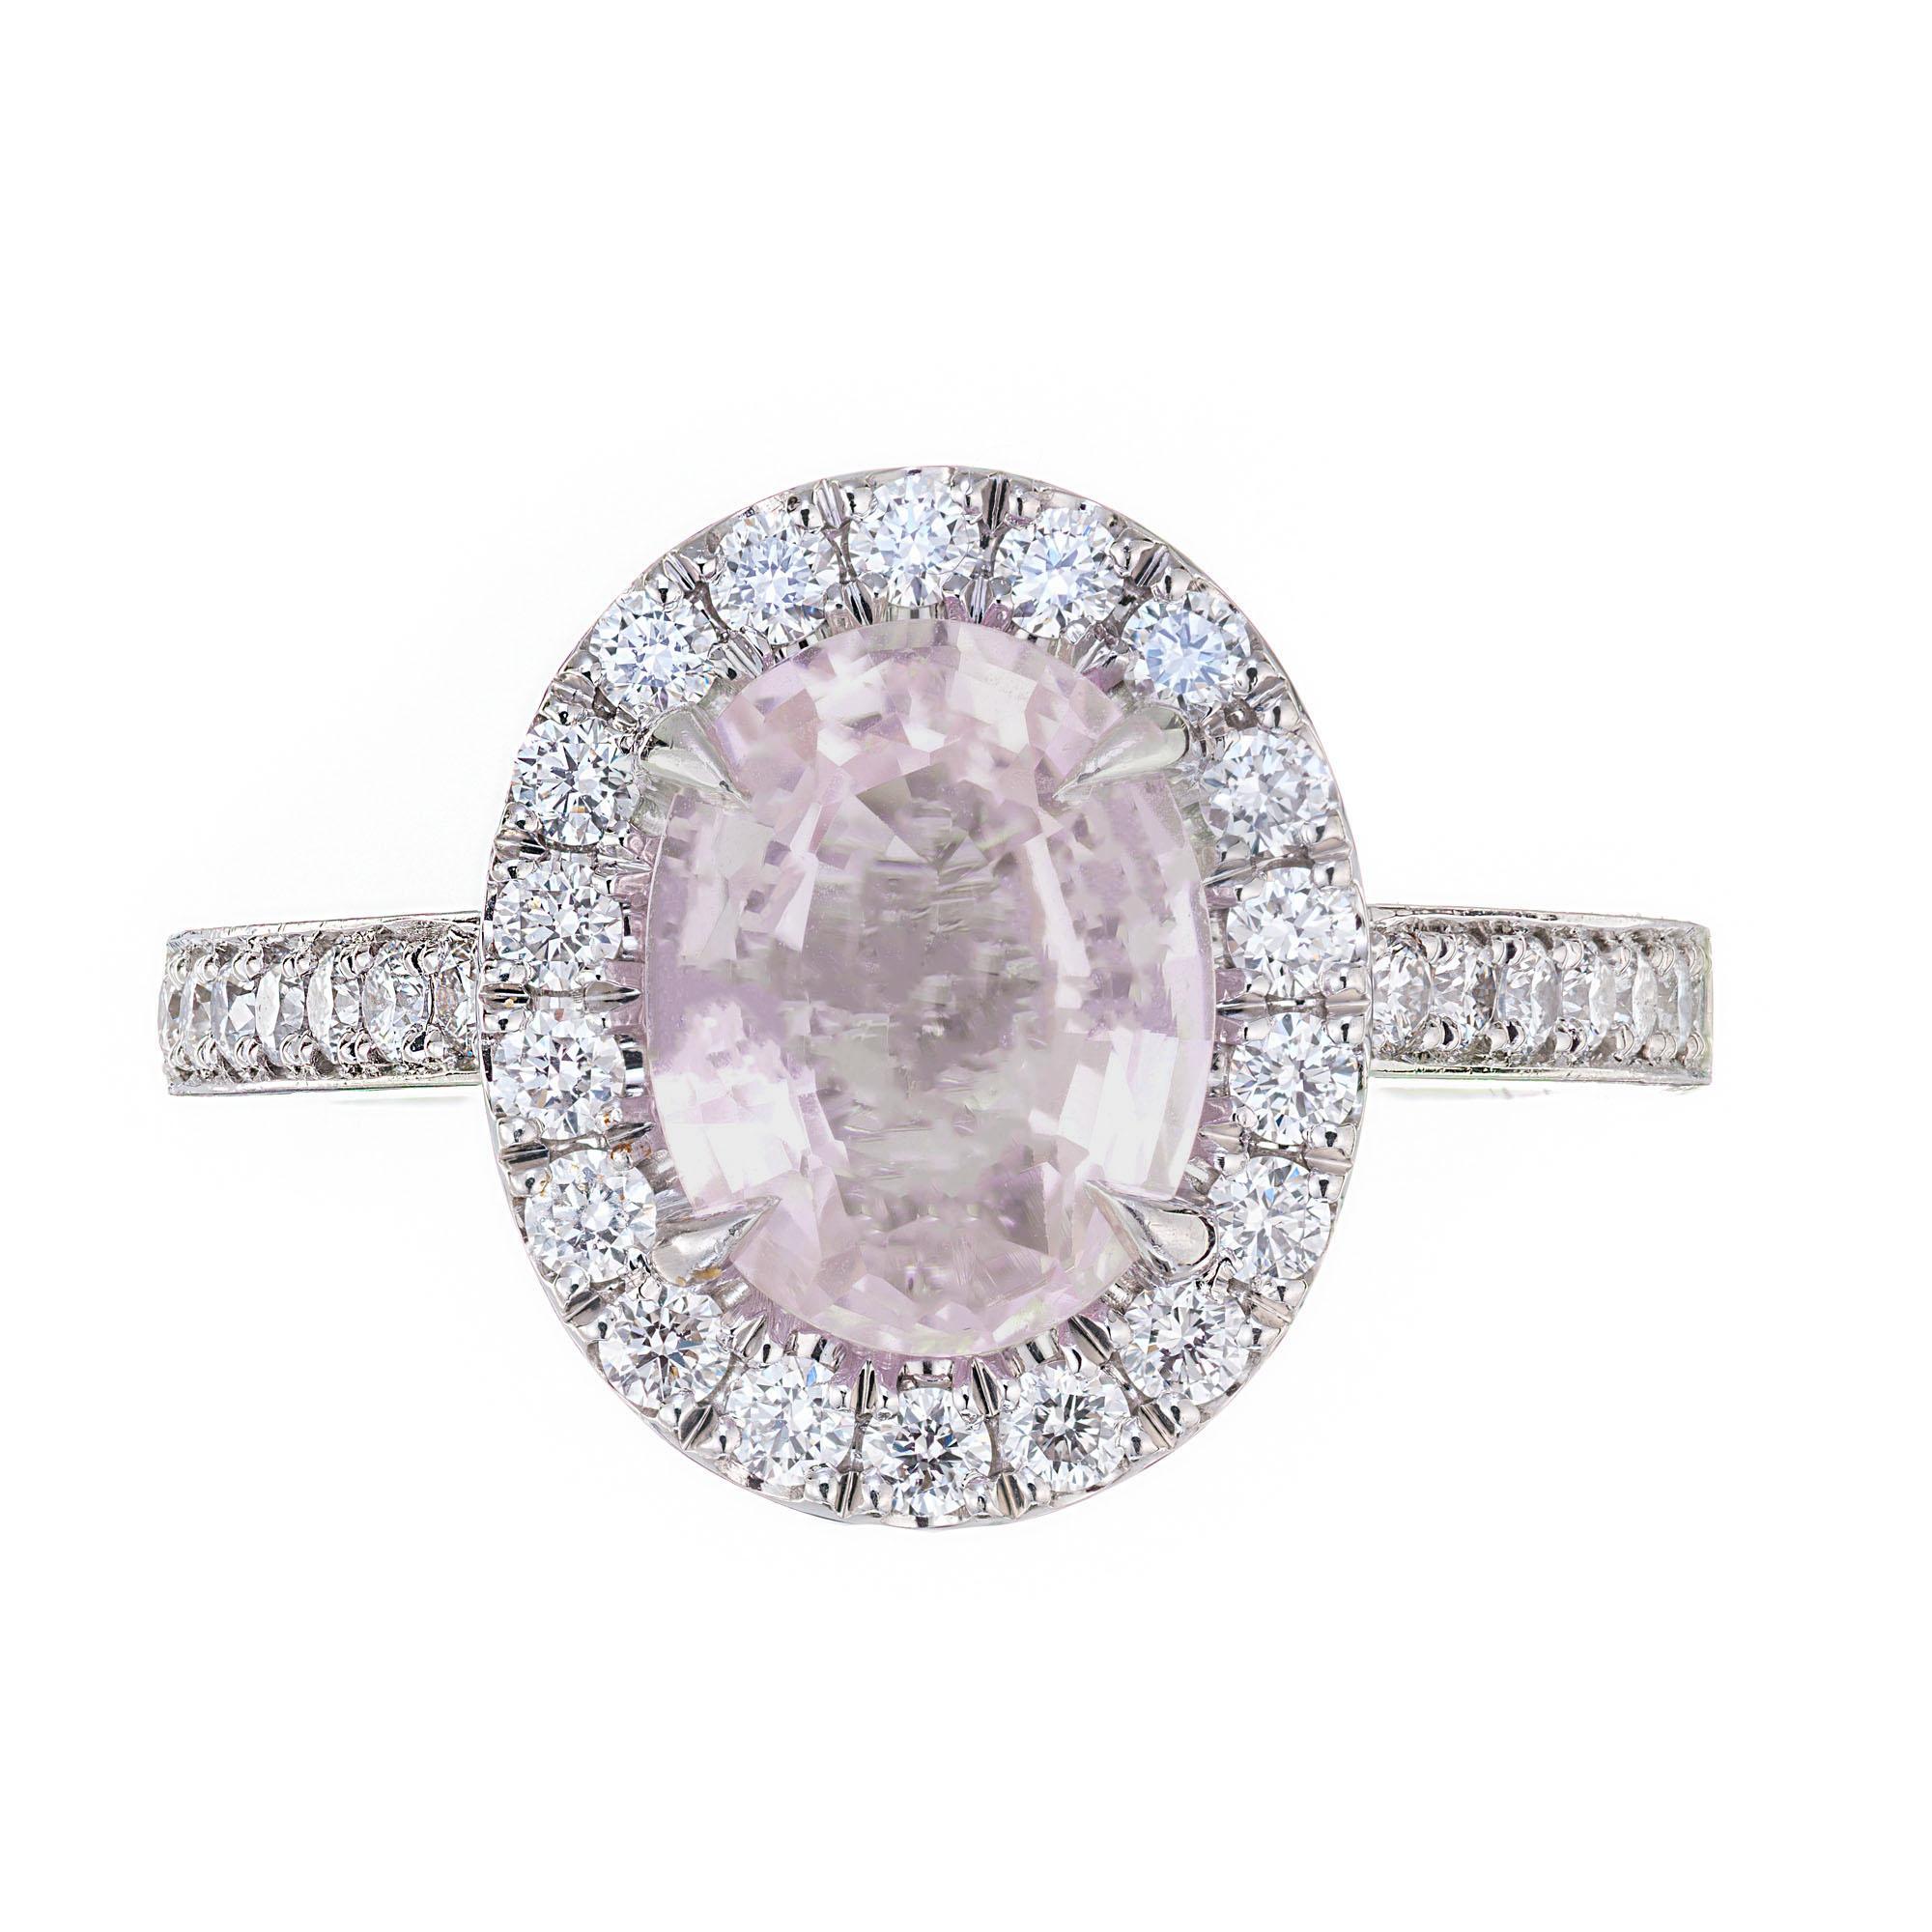 Pink sapphire and diamond halo engagement ring. GIA certified natural no heat very light purplish pink Sapphire with a halo of round cut diamonds in a platinum setting with round cut accent diamonds along the shank.  The Sapphire is from a 1900’s